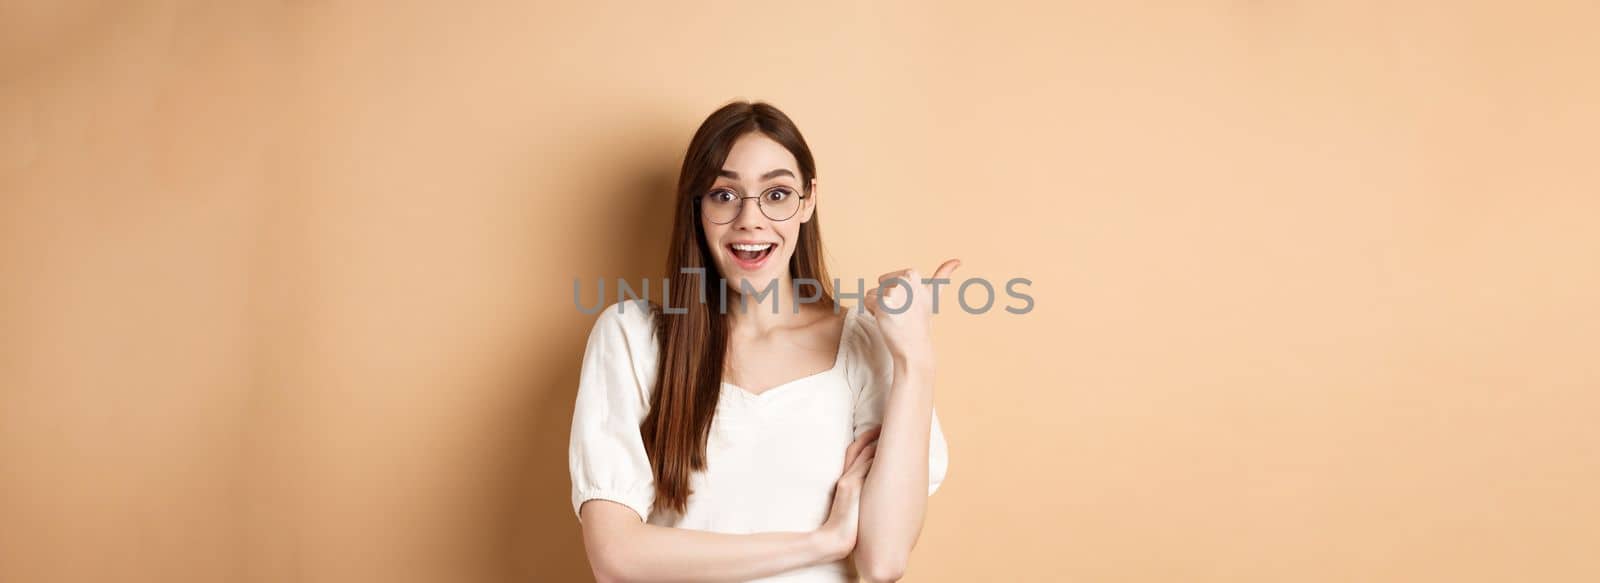 Excited girl in glasses pointing aside at logo, smiling amazed, recommending company, standing on beige background.